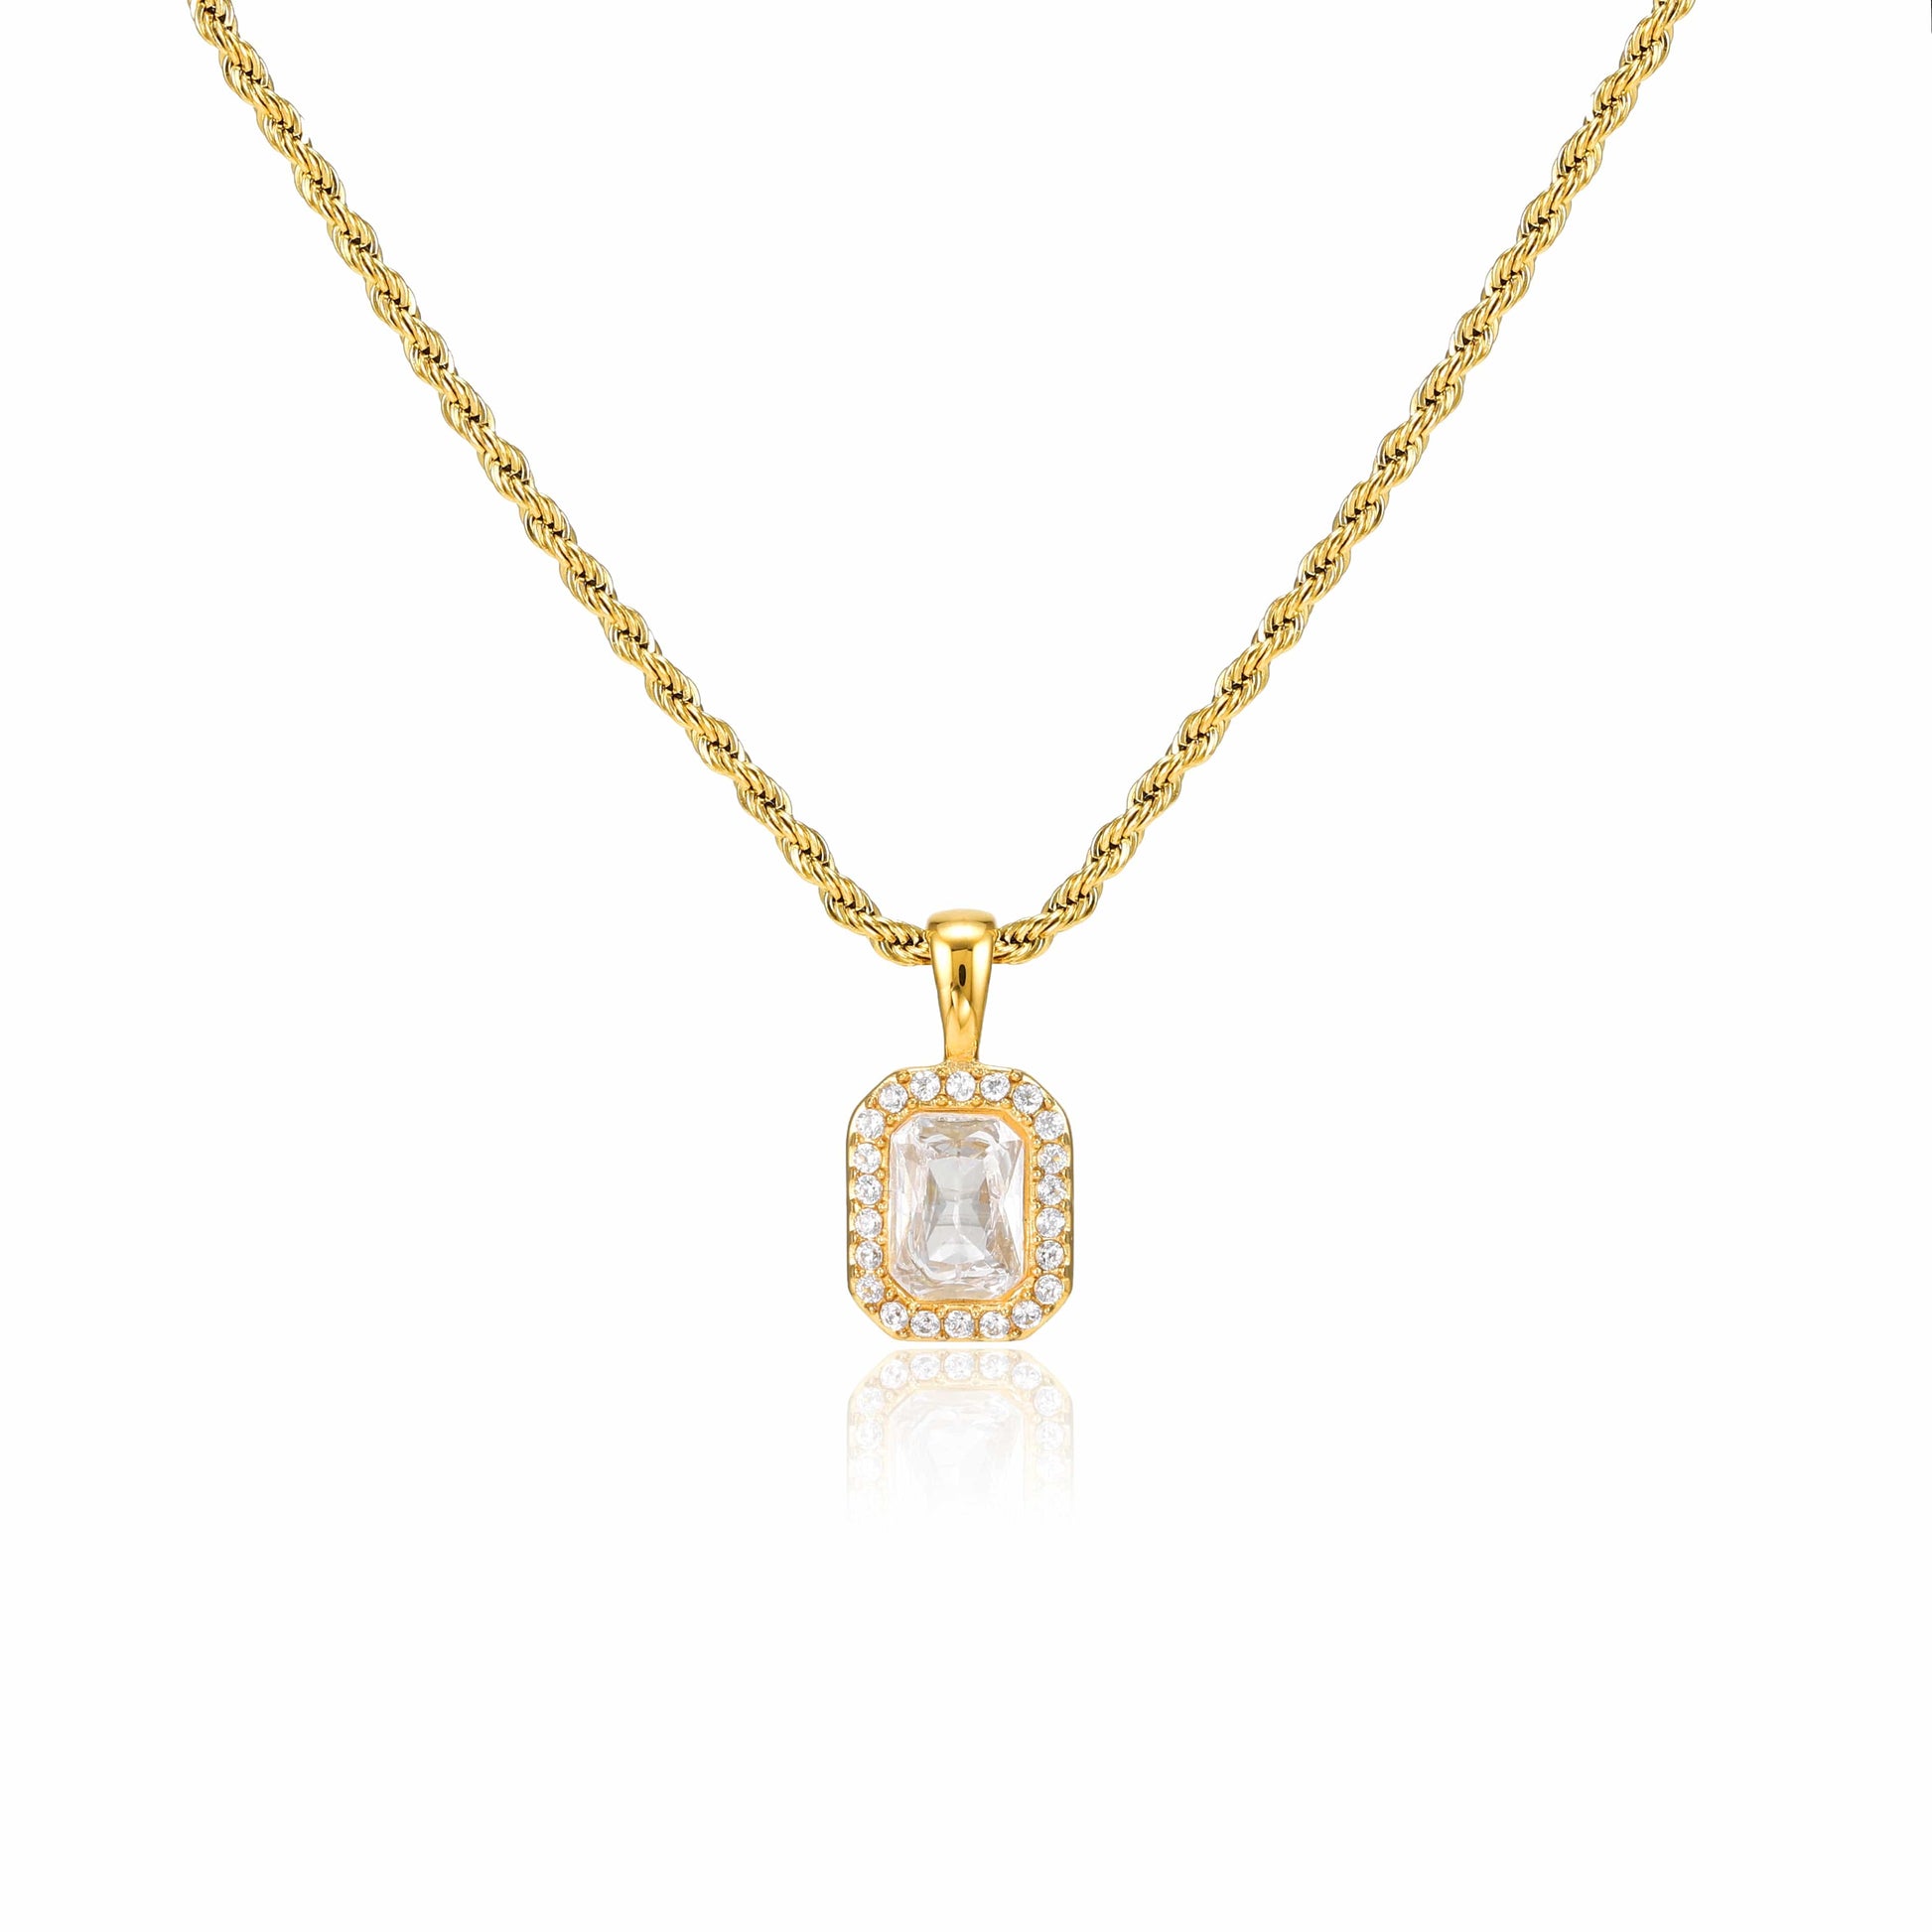 bianco rosso Necklaces Gold Diamond Brilliance Necklace cyprus greece jewelry gift free shipping europe worldwide